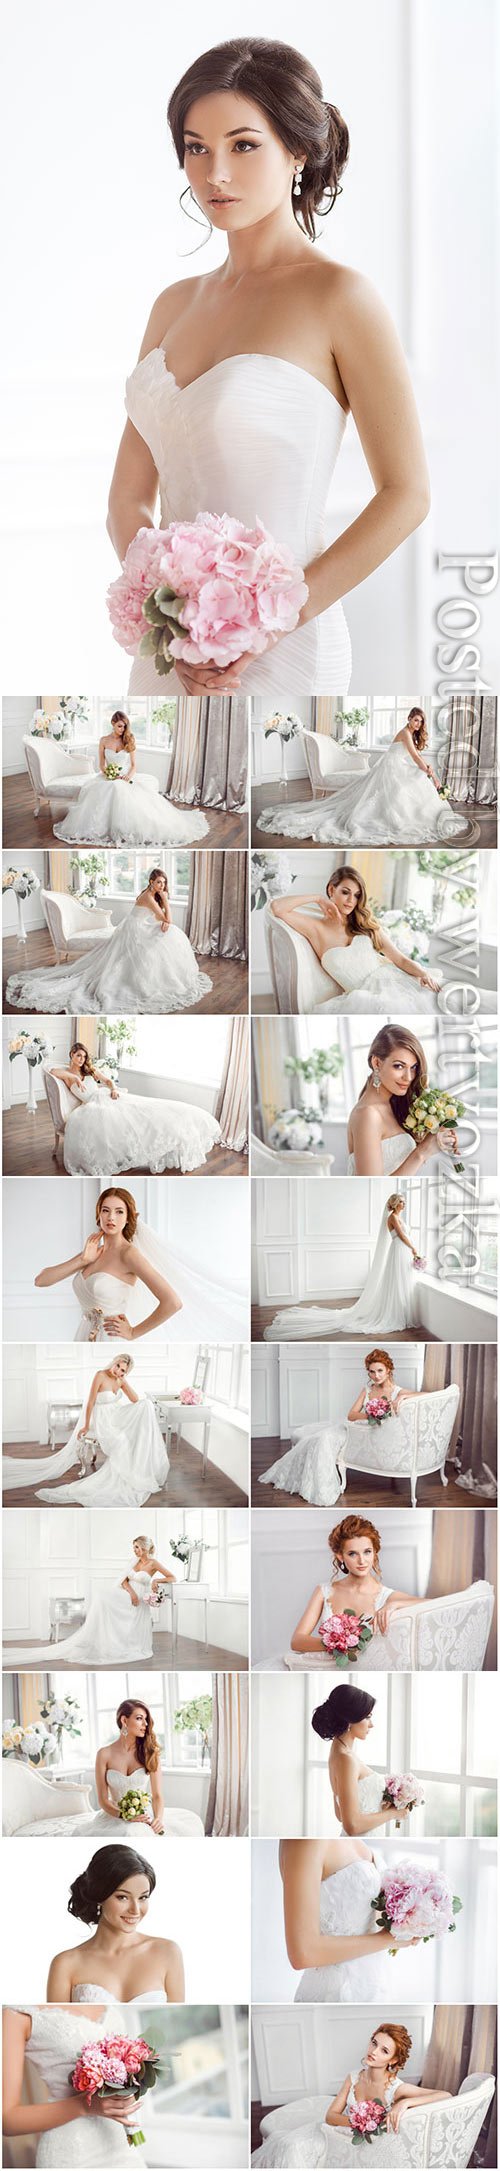 Beautiful brides with wedding bouquets stock photo